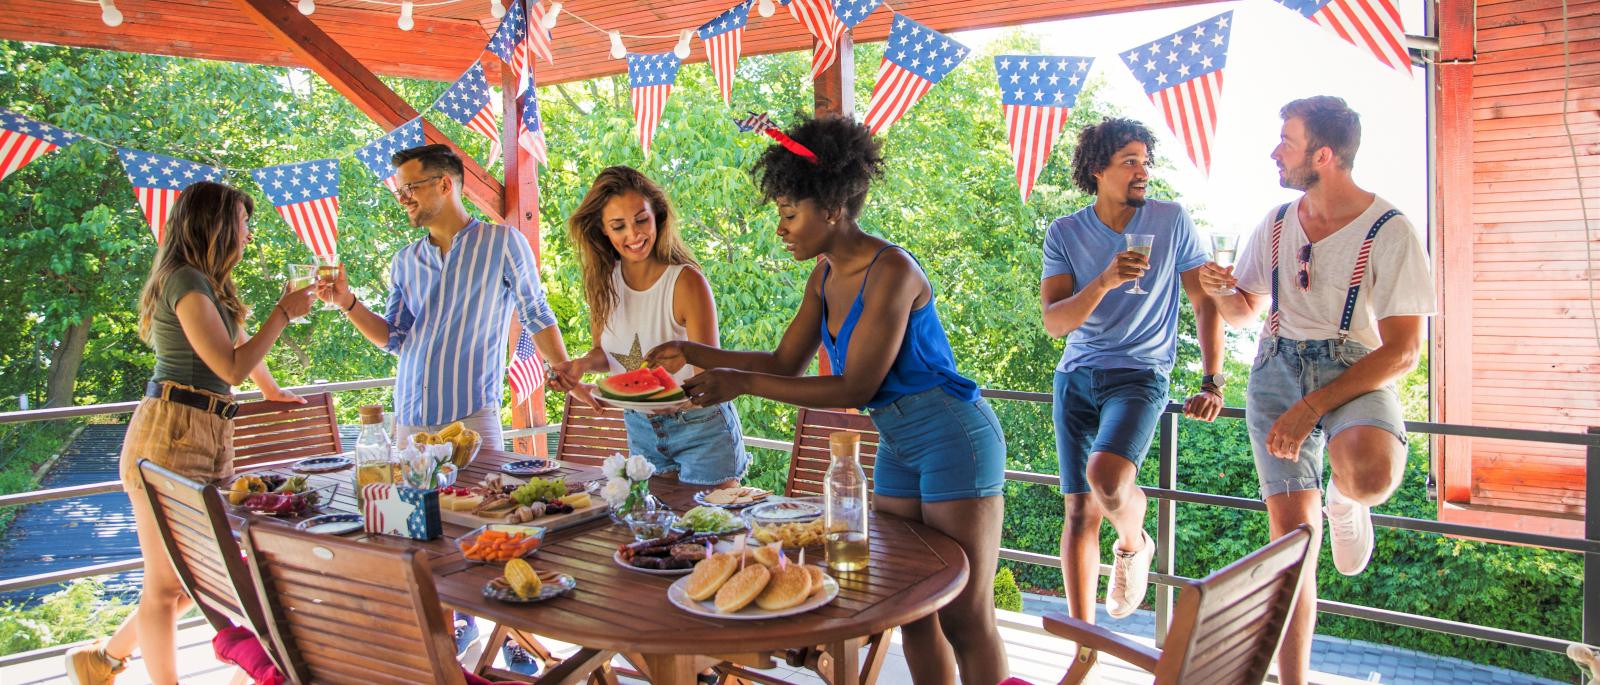 Group of people having an outside party with food displayed on the table in a shaded area.